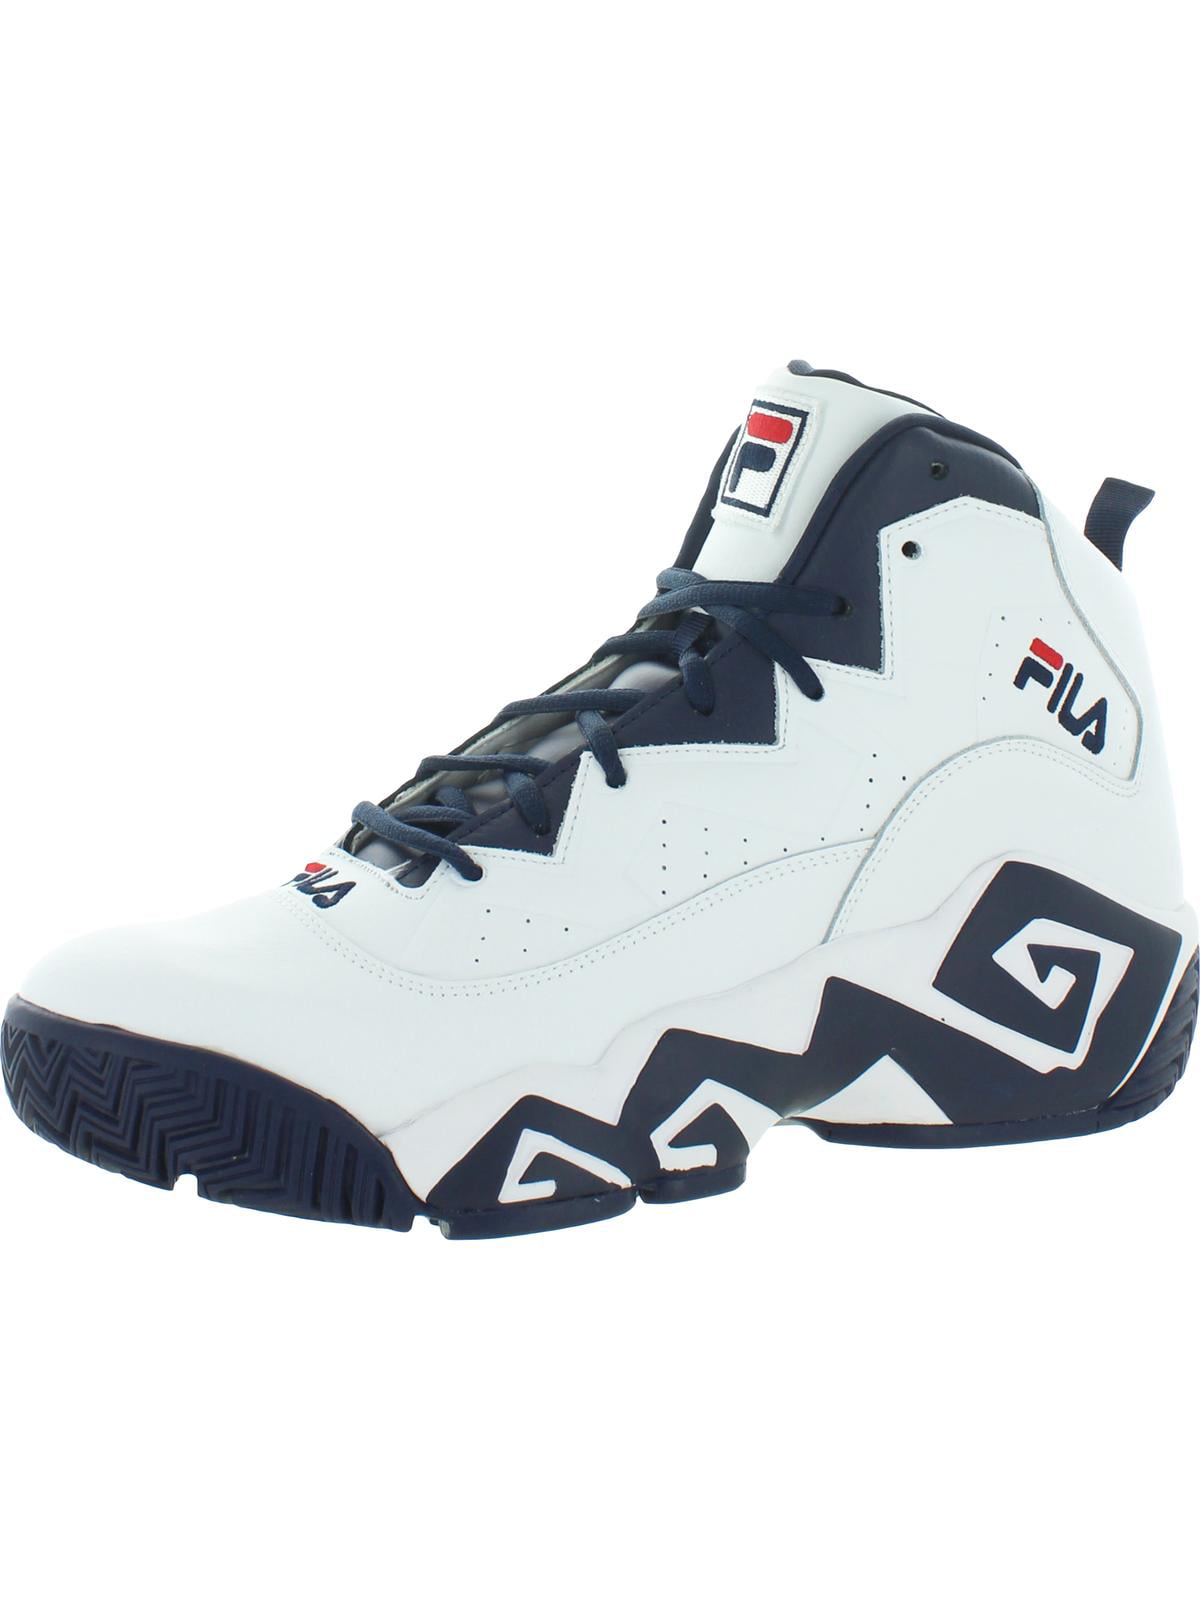 Fila Old Shoes Online Shopping | espacopotencial.org.br